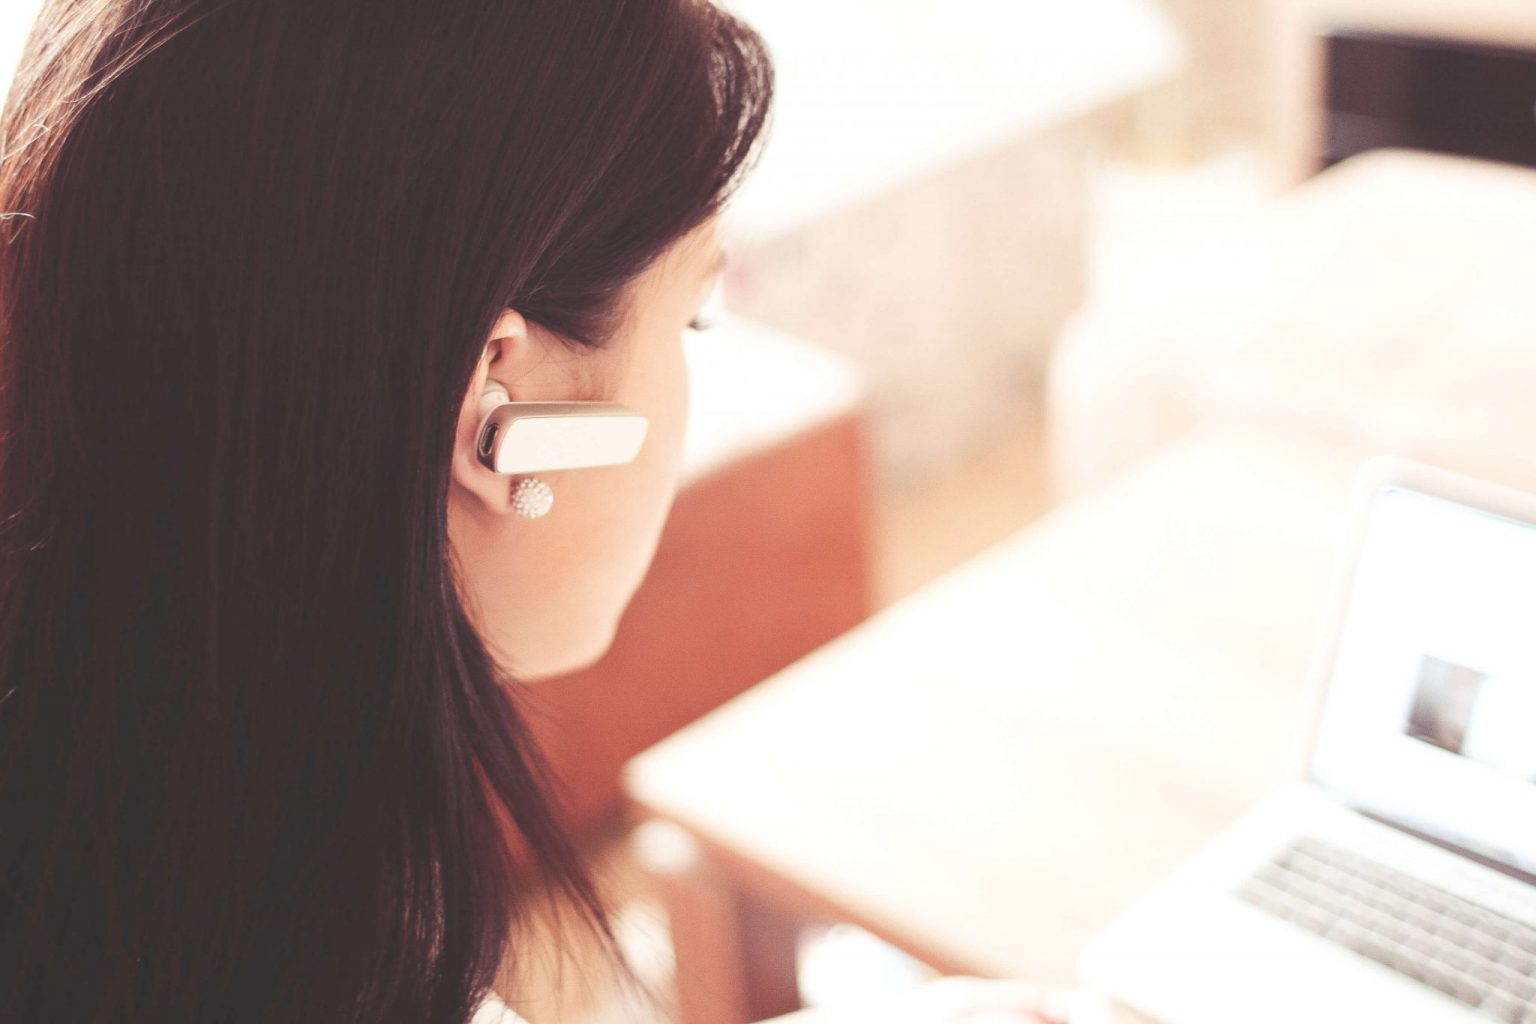 4 Best Practices You Should Be Using For Customer Service